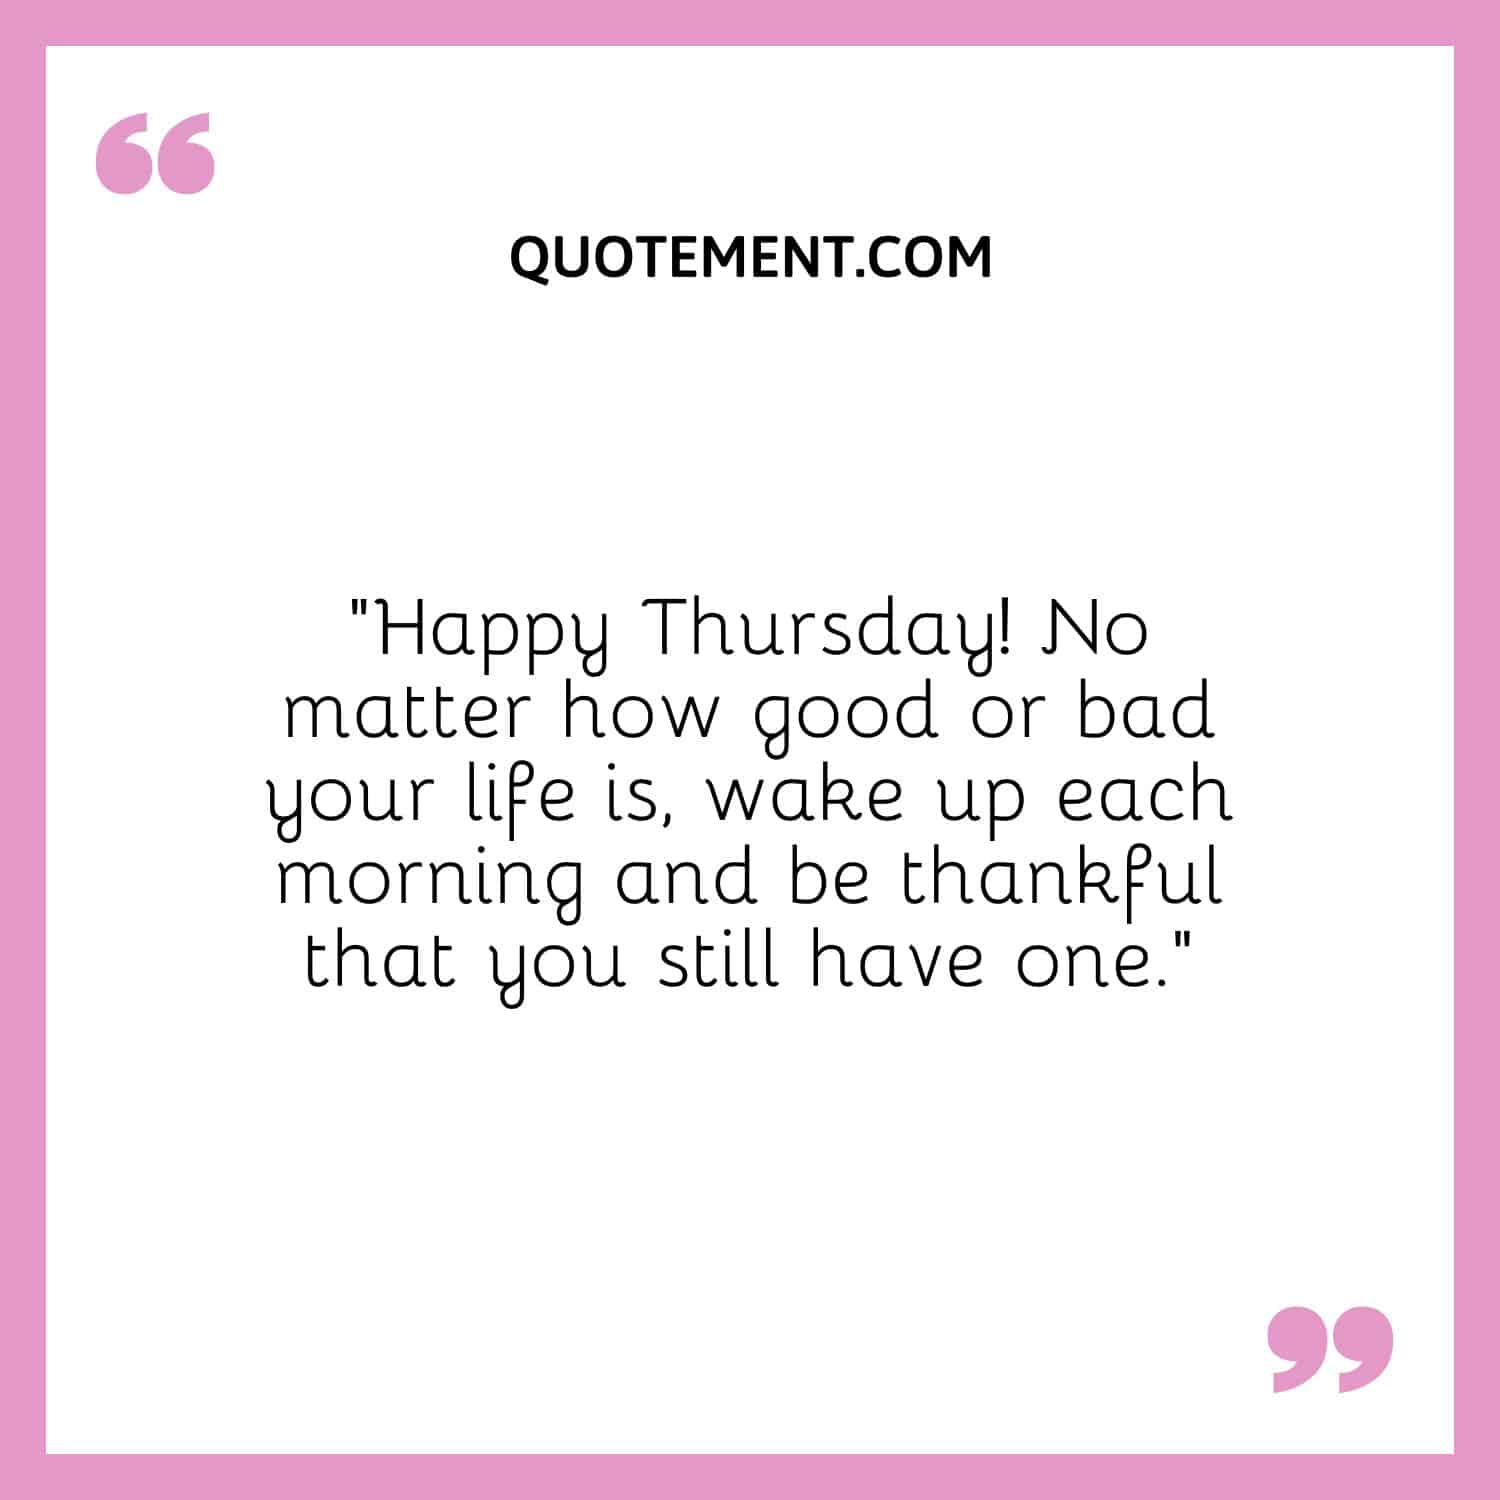 “Happy Thursday! No matter how good or bad your life is, wake up each morning and be thankful that you still have one.”